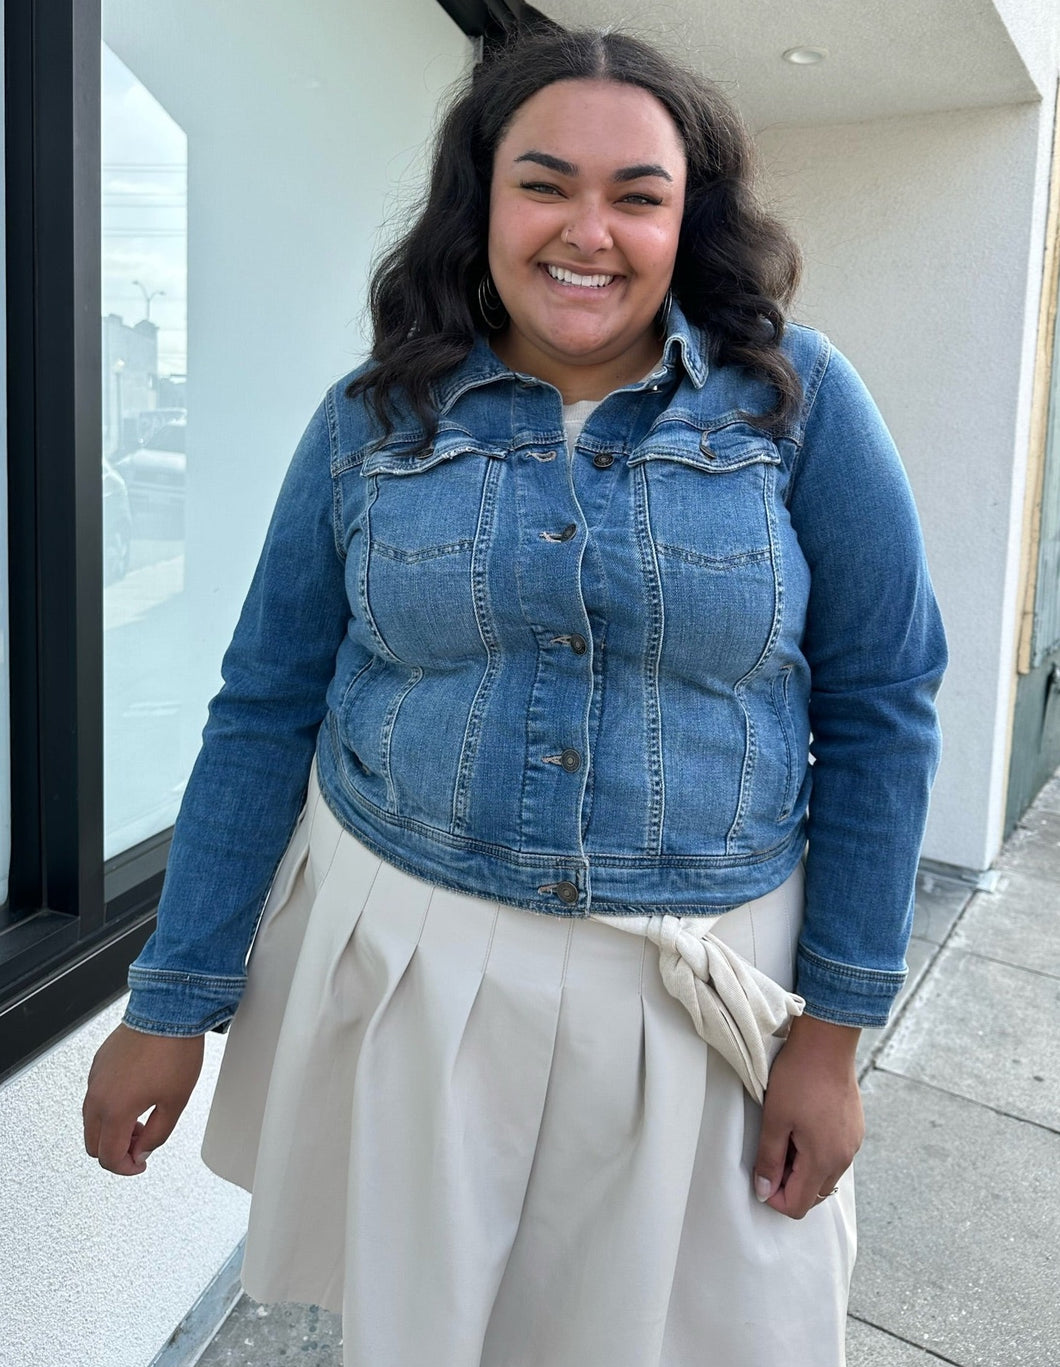 Front view of a size 1X Ava & Viv medium wash denim jacket styled buttoned up over a cream sweater and mini skirt on a size 18/20 model. The photo is taken outside in natural lighting.